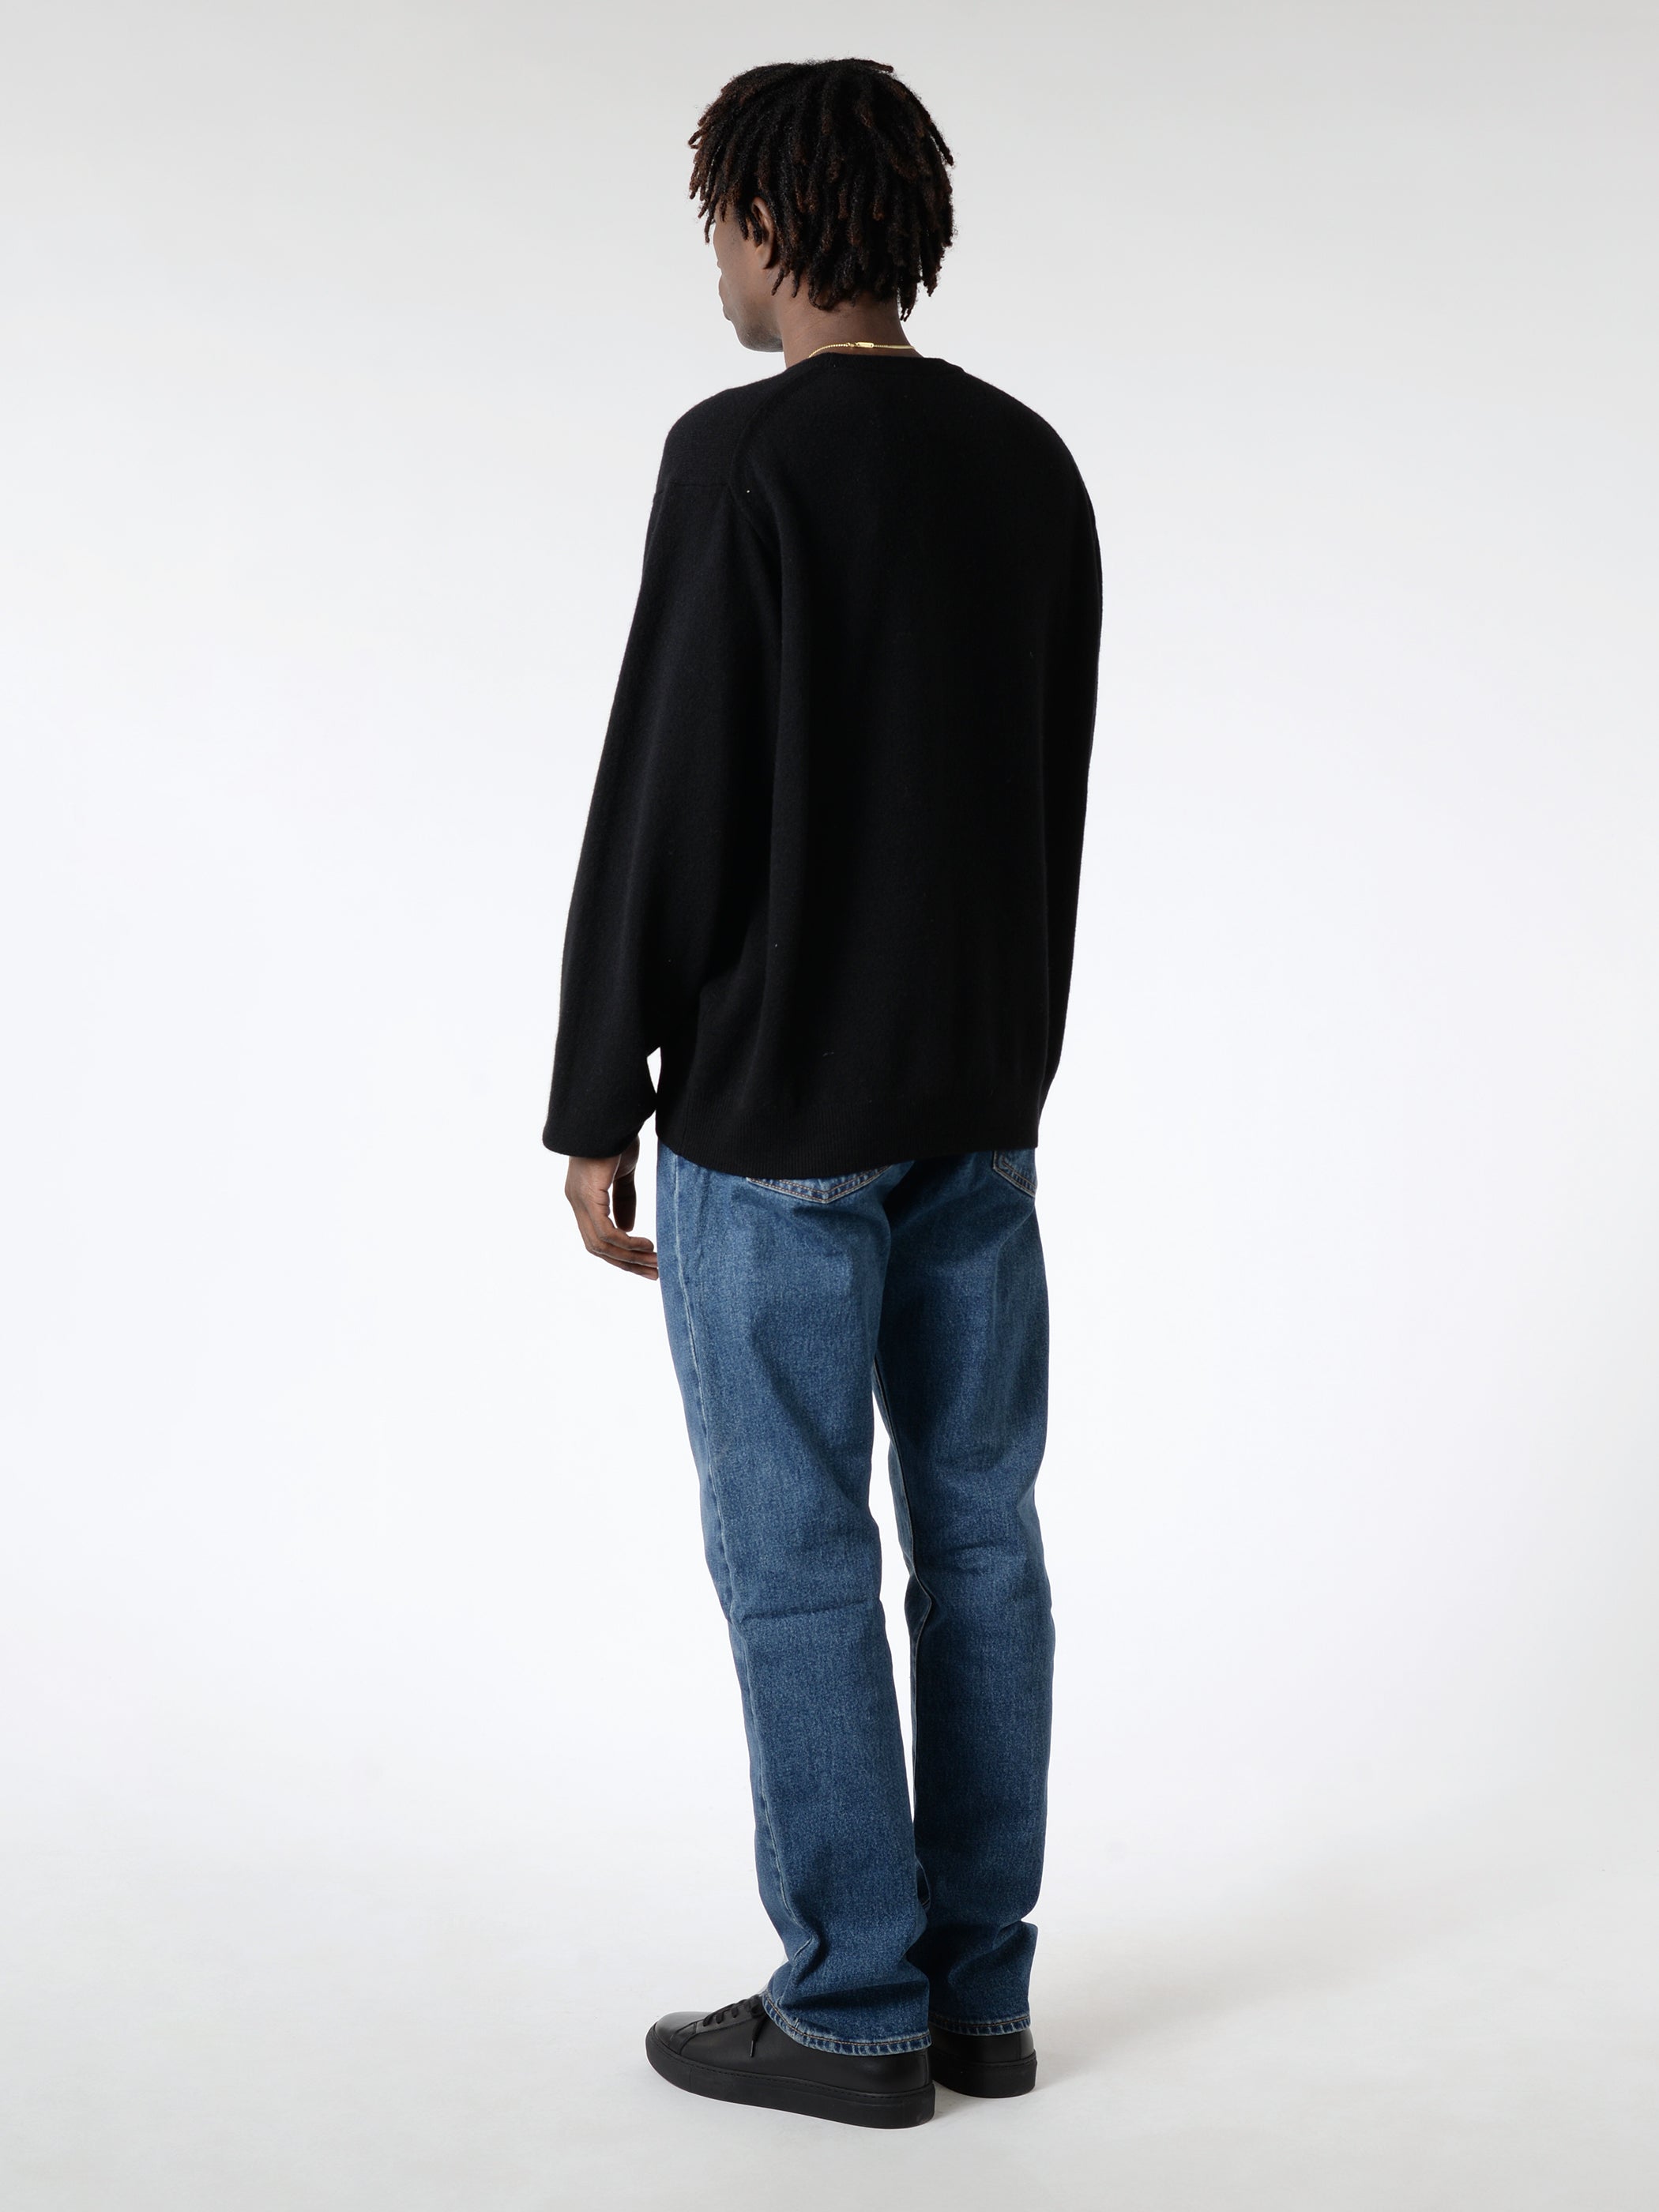 Lambswool Crew Neck Knit Pullover